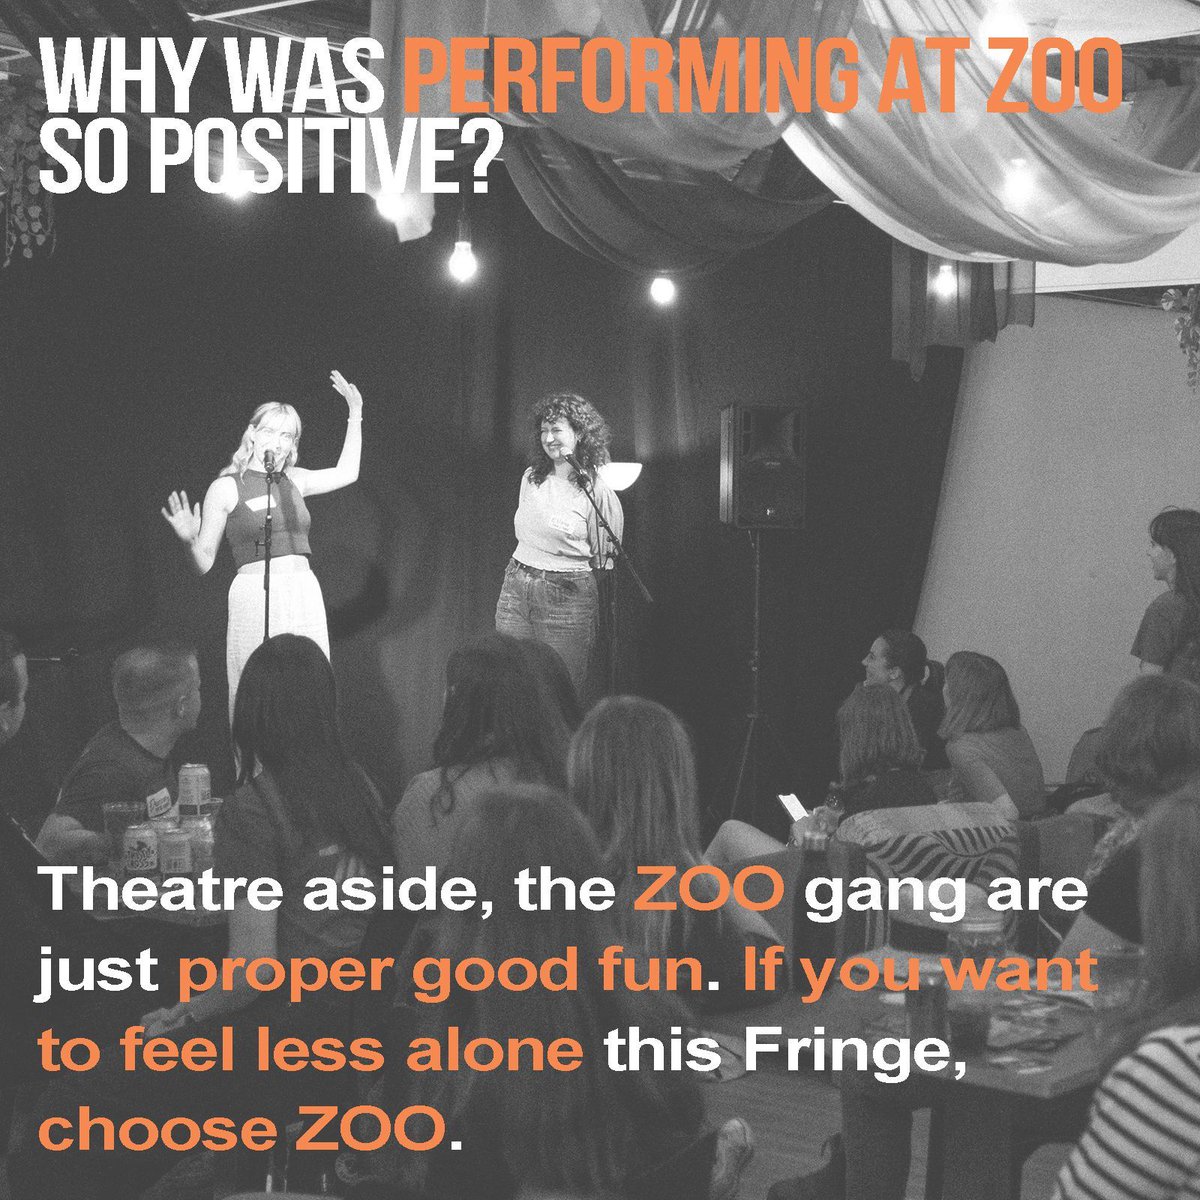 We're open for applications for incredible #theatre #dance and #circus to join us for #ZOO24 at #edfringe and here's @PINCHYtheatre on what made their experience performing End of the World at ZOO Playground so positive. More Info and Apply via buff.ly/3w0AJez